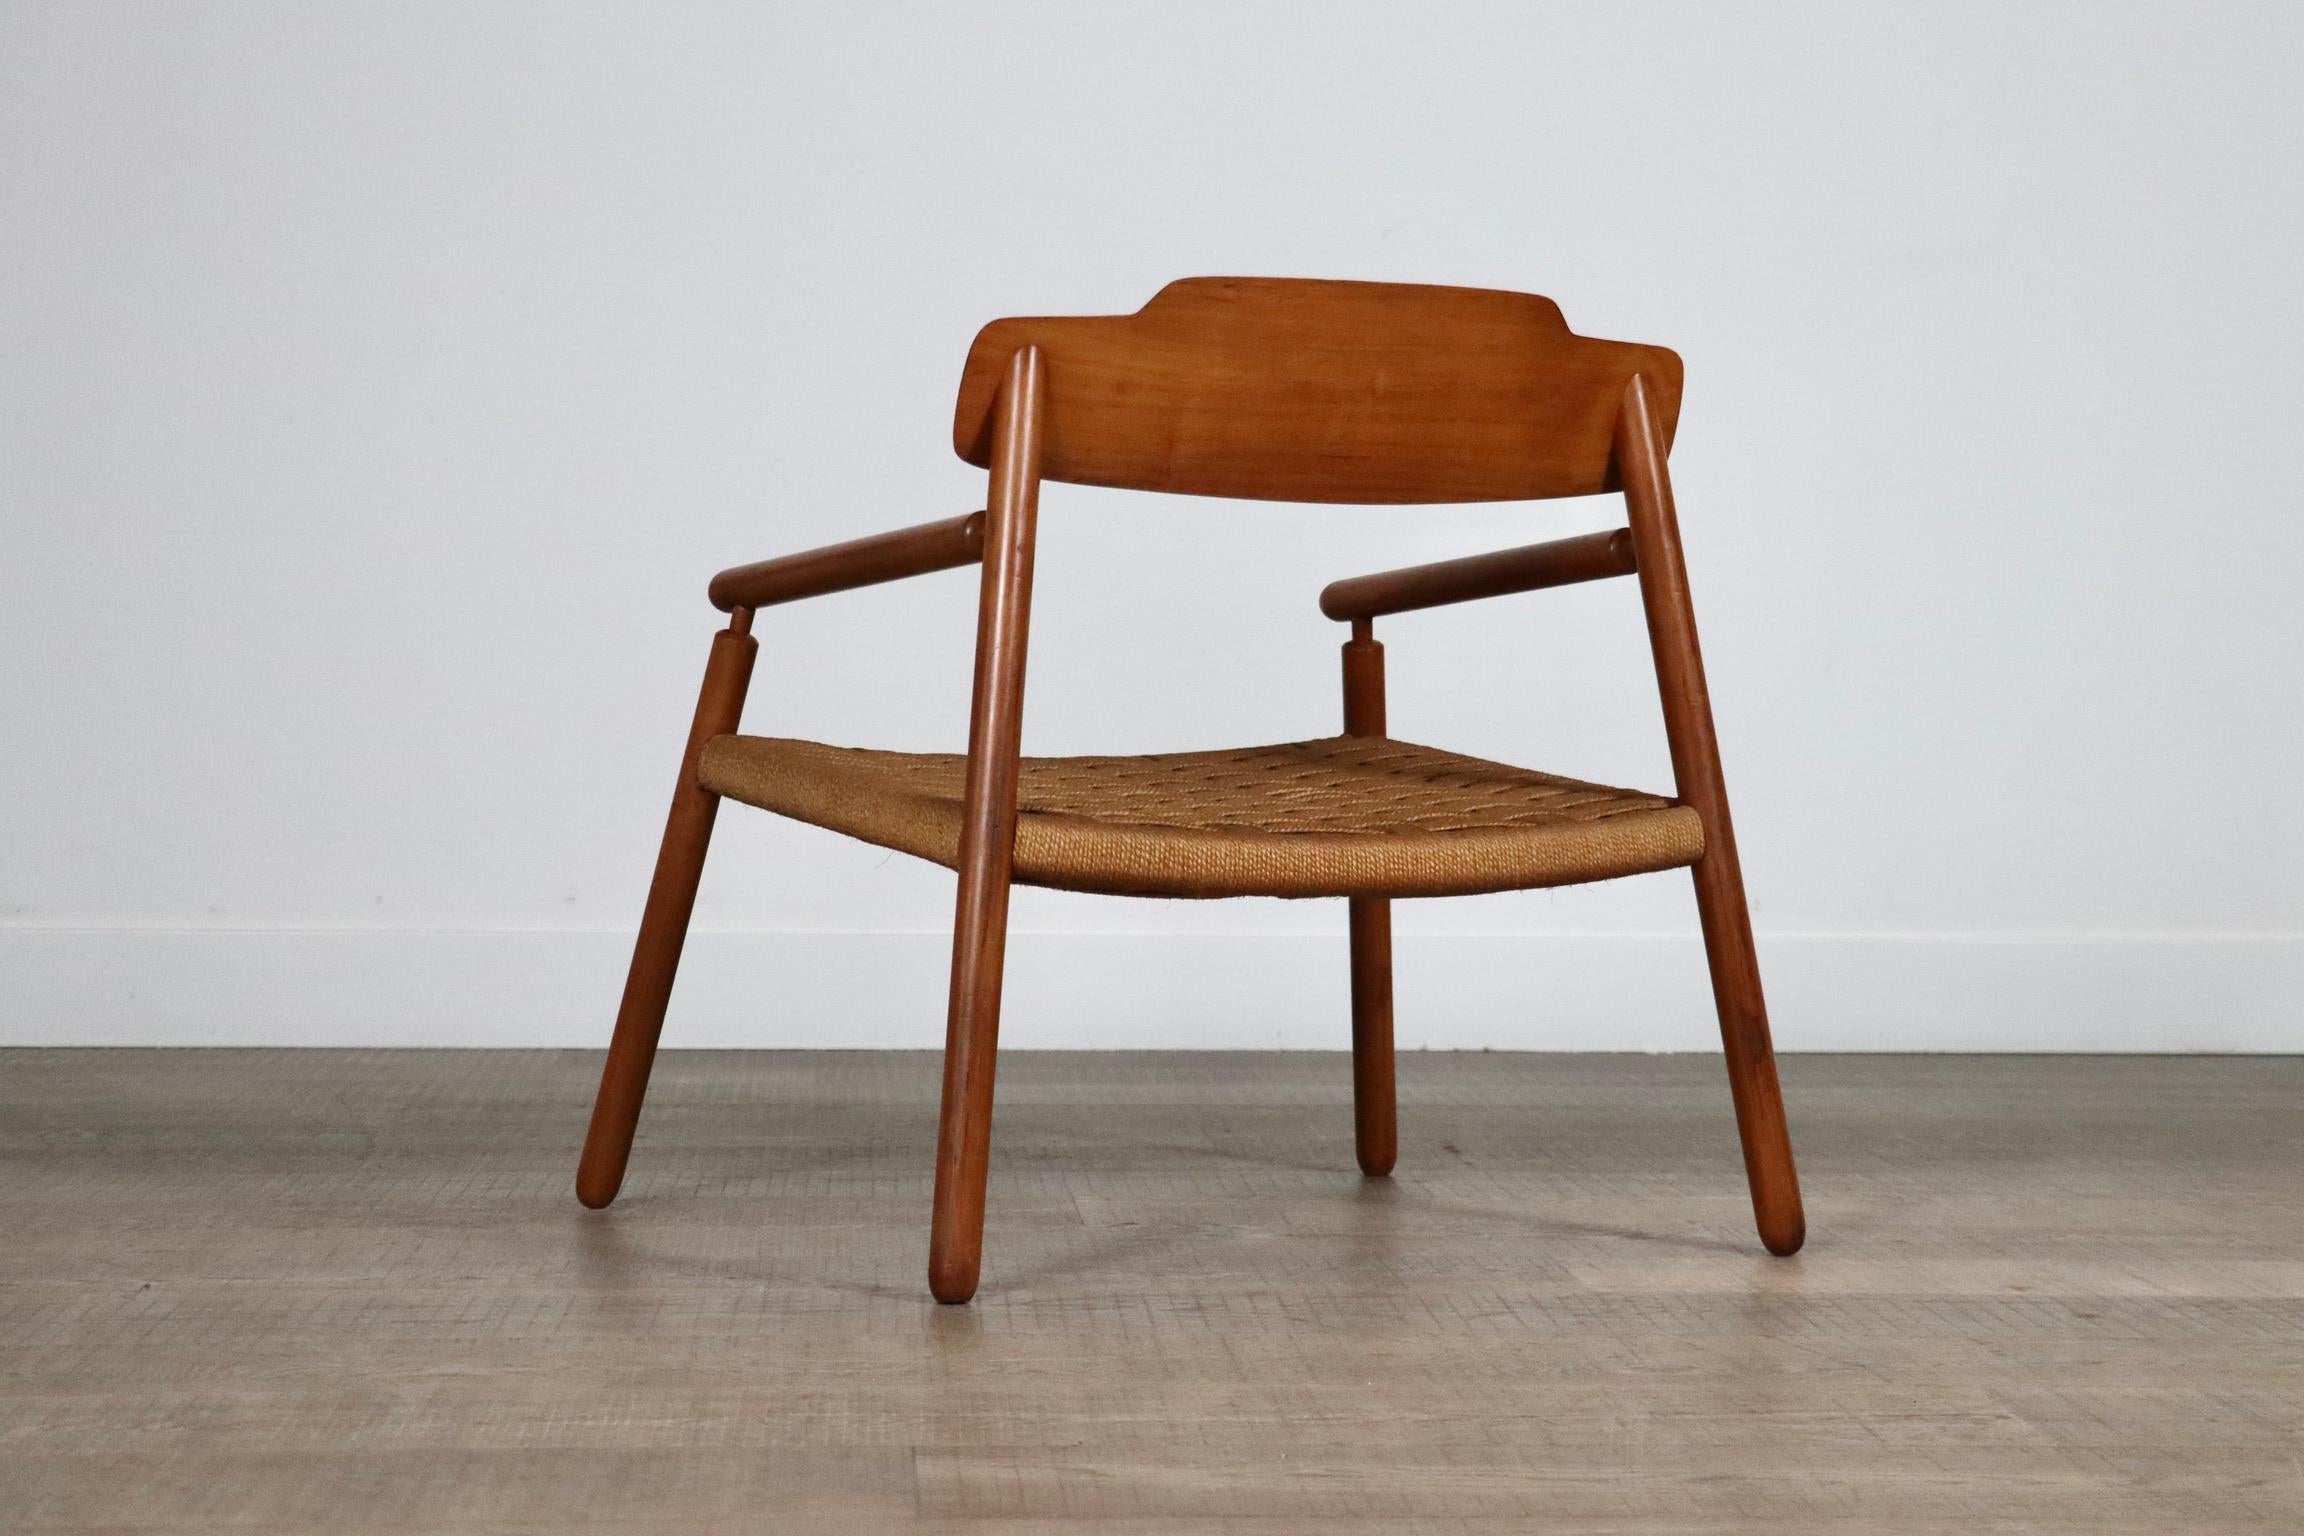 Midcentury Minimalistic Easy Chair In Oak And Papercord, Finland 1950s For Sale 5